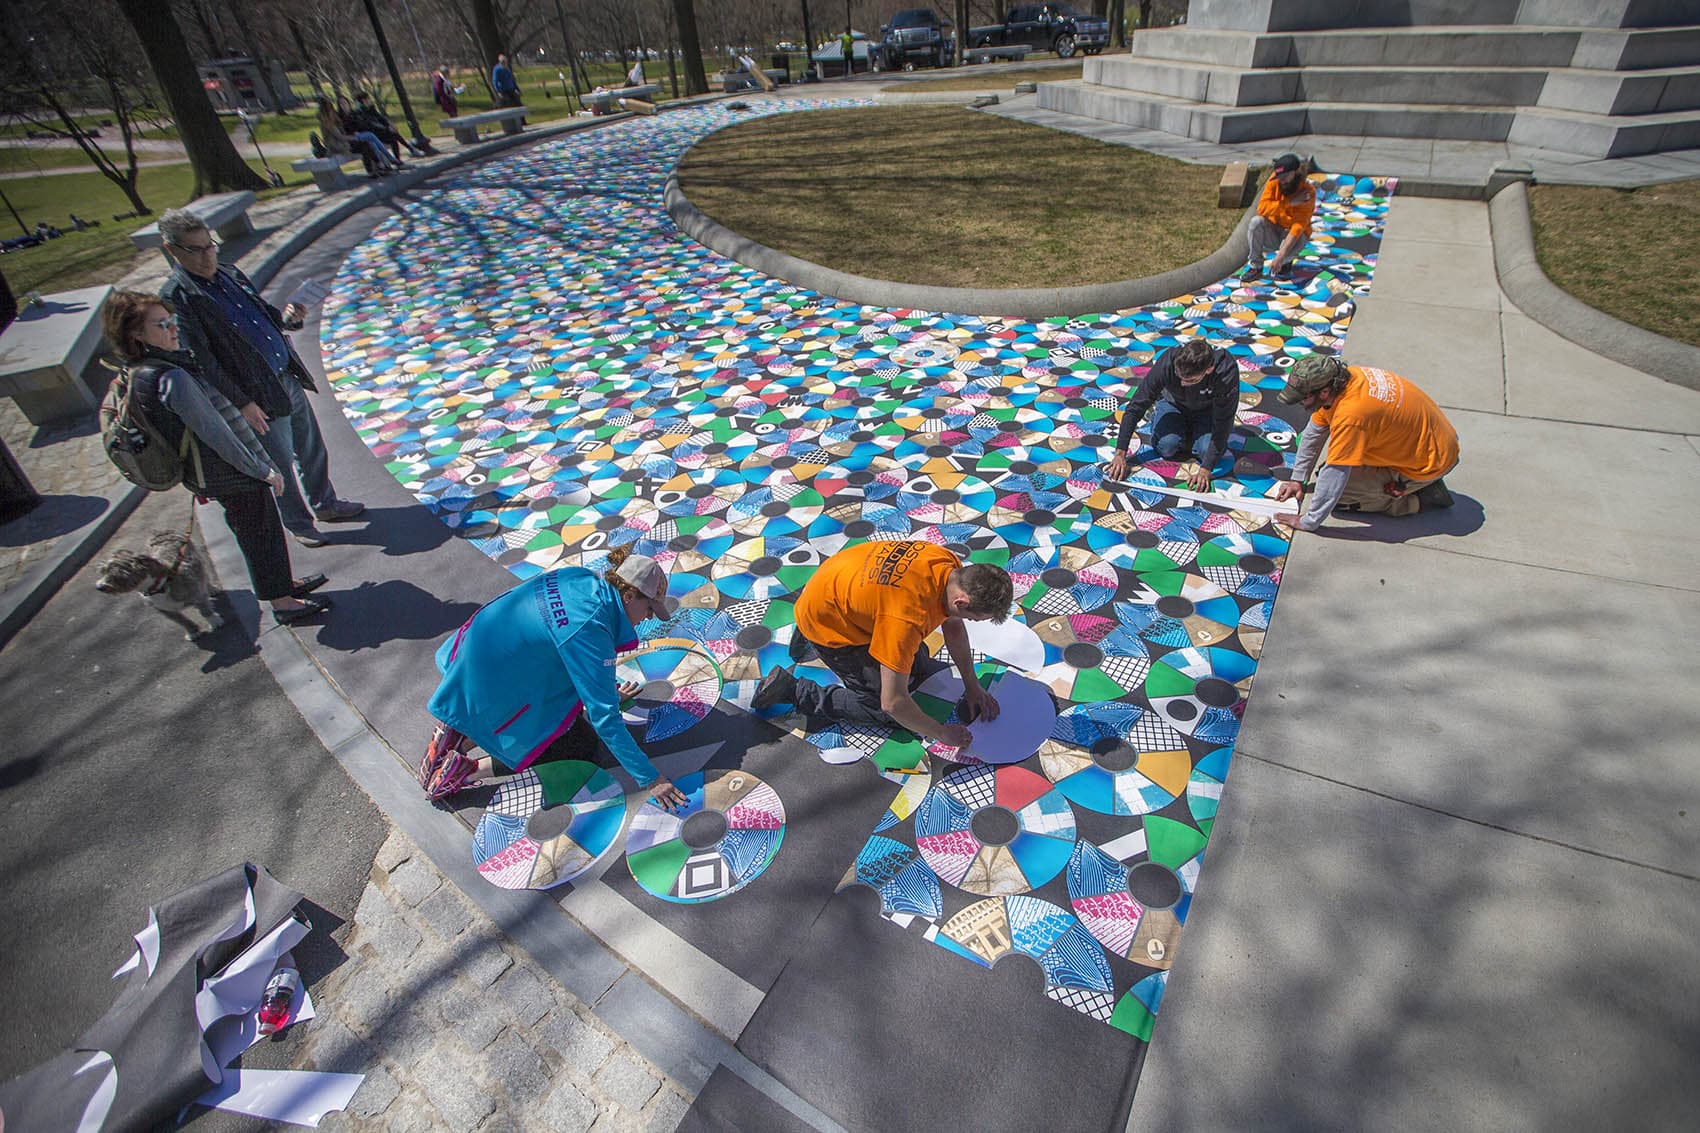 Julia Vogl, in blue, works with a team from Boston Building Wraps to install the &quot;Pathways to Freedom&quot; project around the Soldiers and Sailors Monument on Boston Common. (Jesse Costa/WBUR)